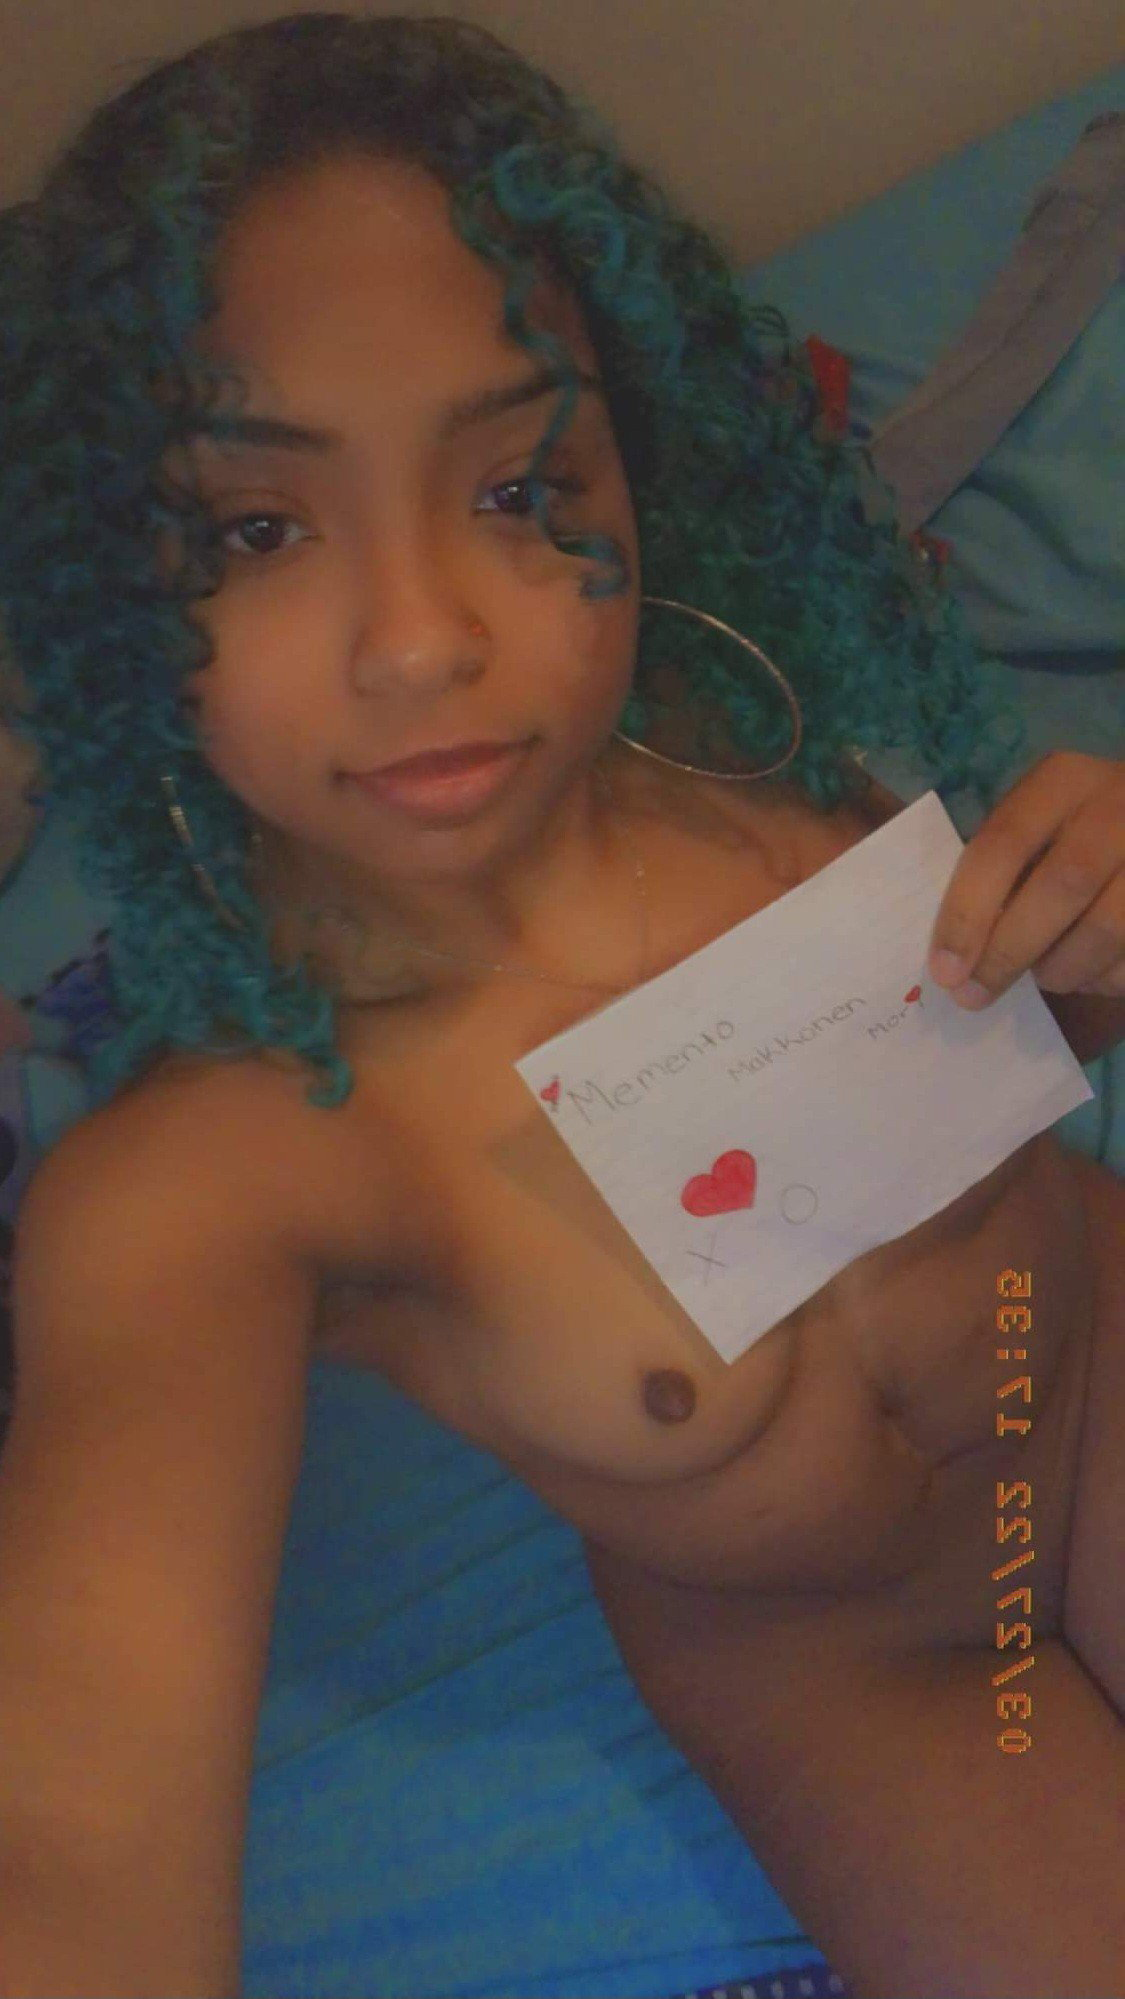 Photo by UnTouchaBallzX0 with the username @UnTouchaBallzX0, who is a verified user,  December 4, 2023 at 12:27 PM. The post is about the topic My Beautiful Fans! X❤️O and the text says '- One of my beautiful fans showing me some love. X❤️O #MyFans #Fansigns #MementoMakkonenMori #Slut #Hoe #Whore #TongueOut'